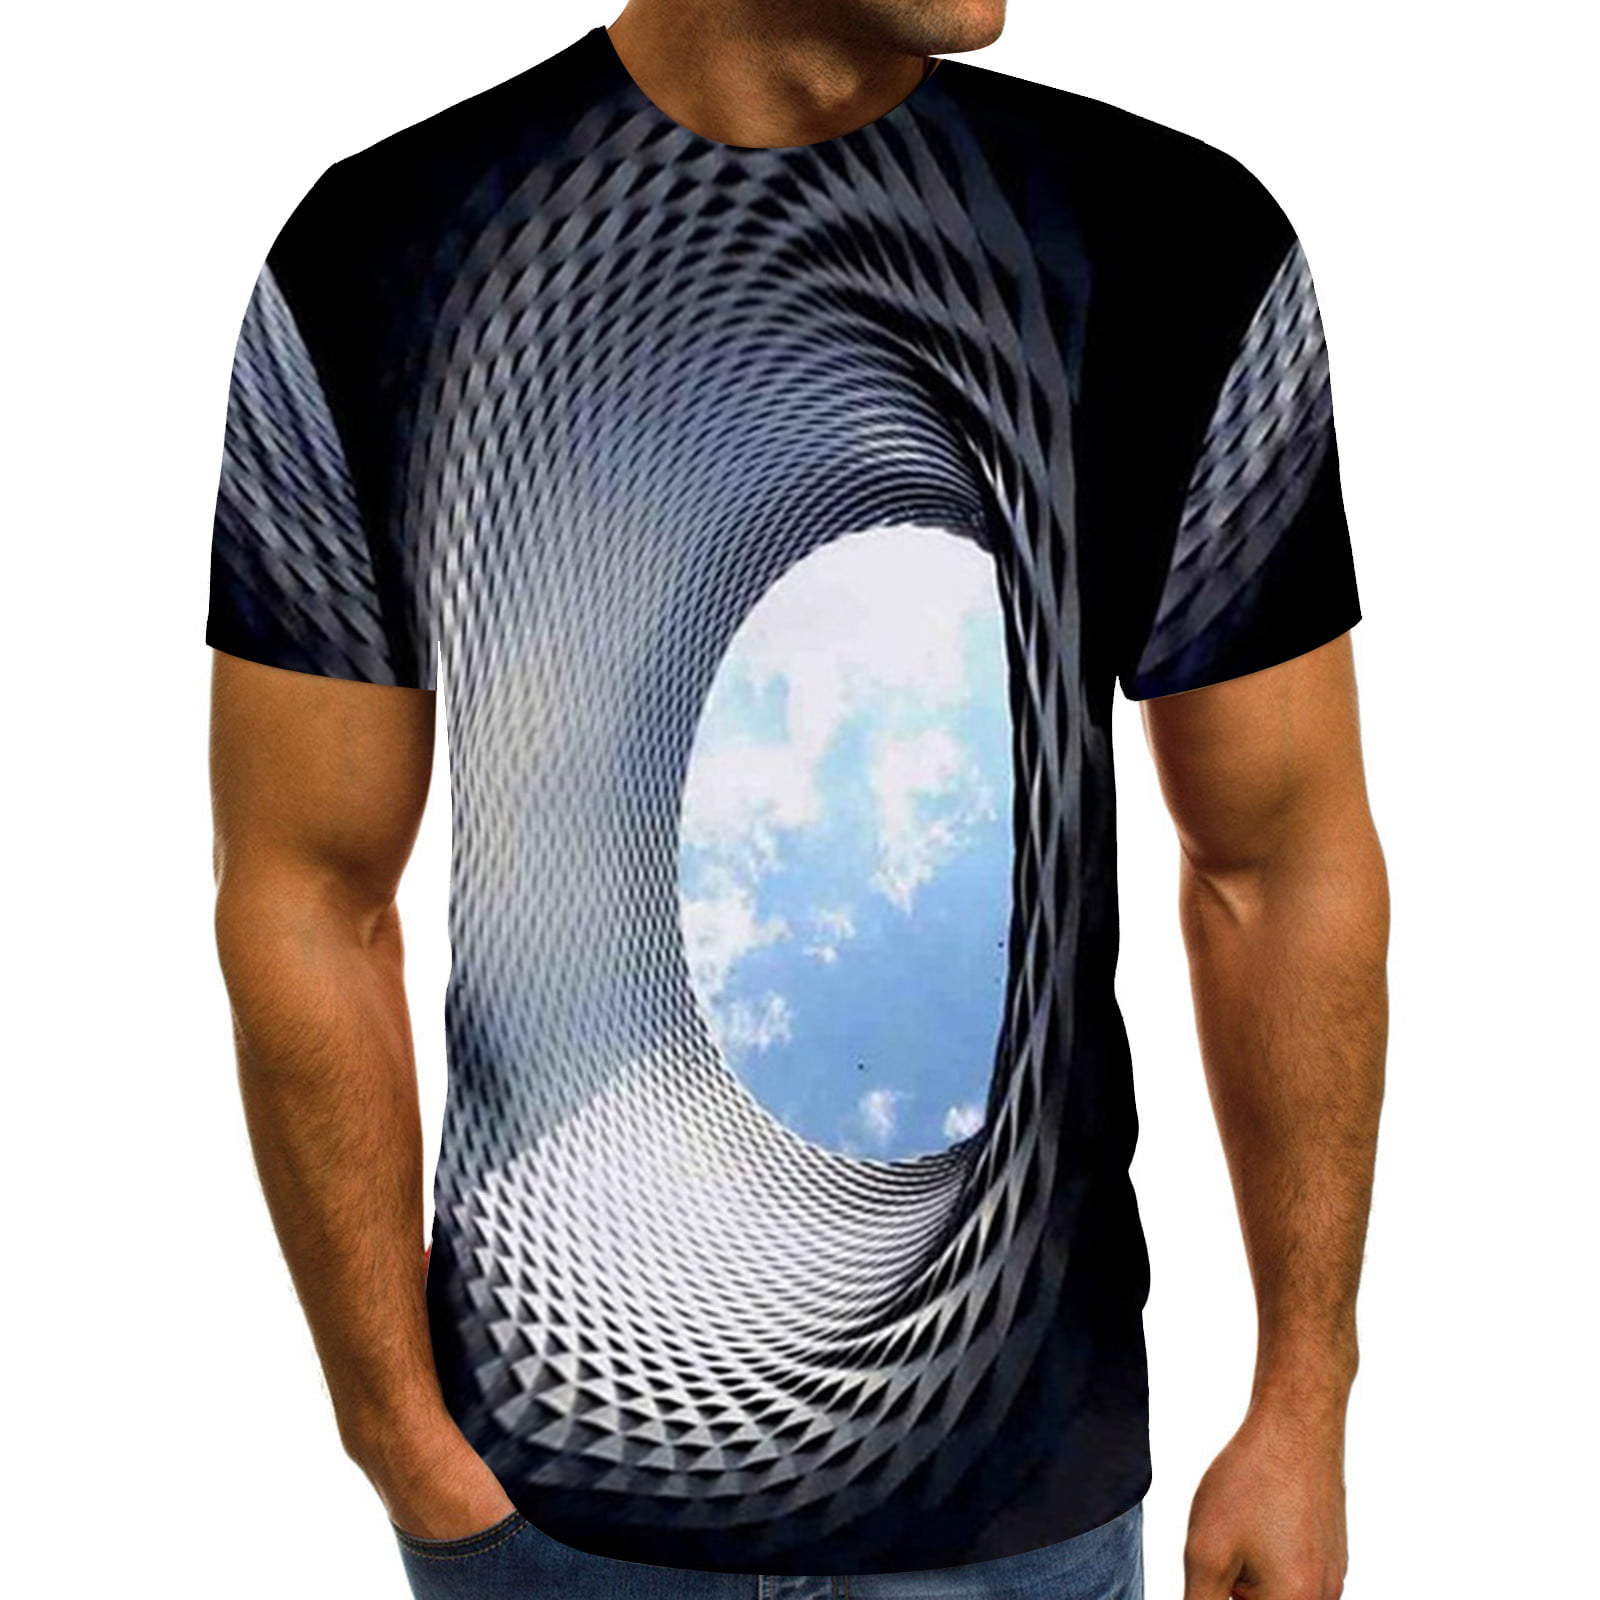 Mens Party Shirt Graphic Tees Casual 3D Creative Printed Shirts Round Neck Short Sleeve Shirt Top Light Weight T-Shirt 